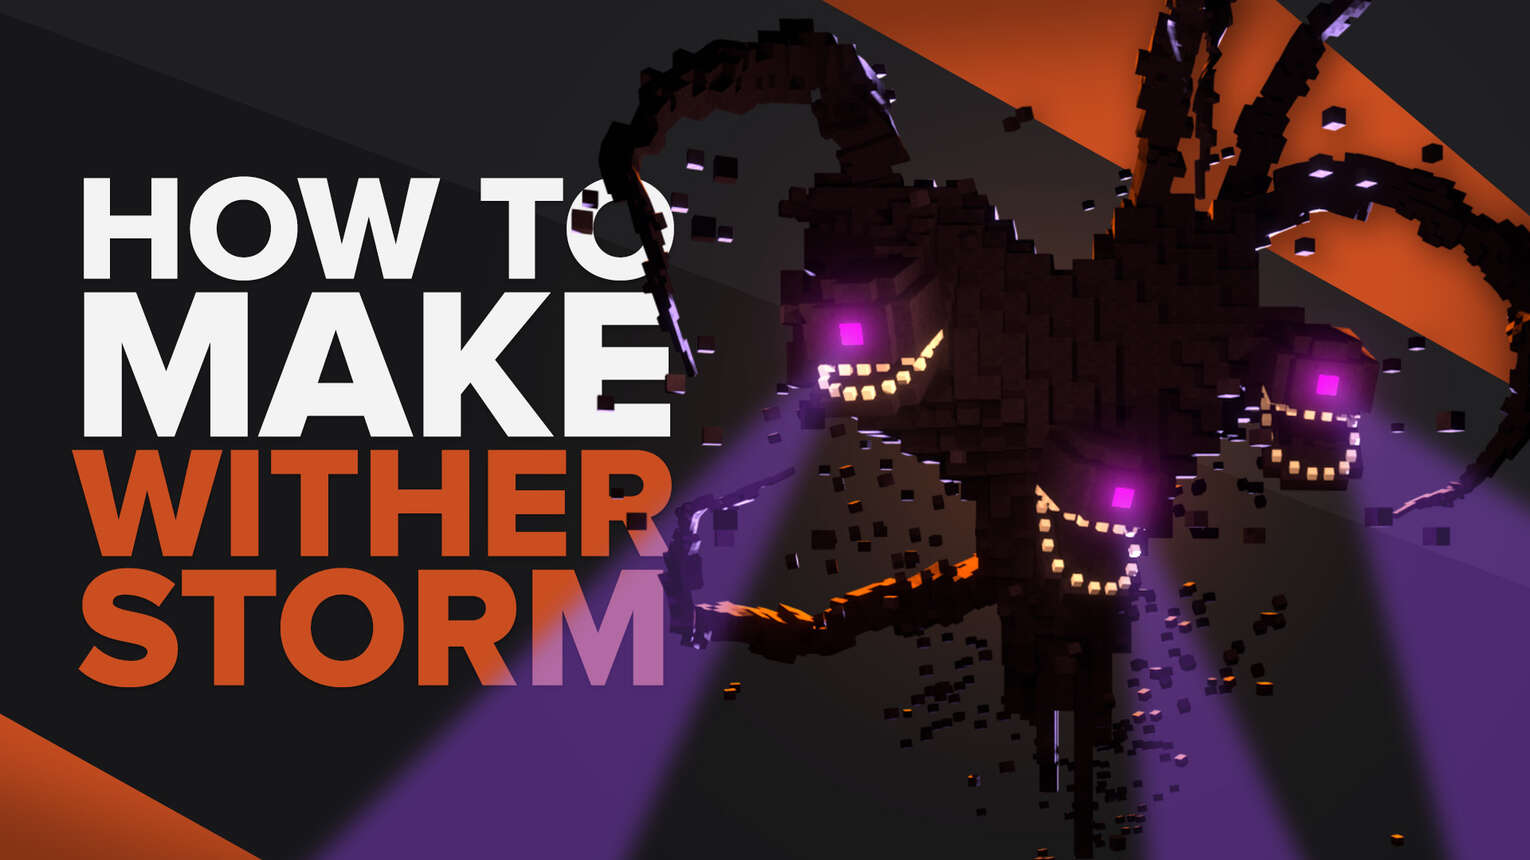 Happy's witherstorm (A witherstorm game on scratch that you should